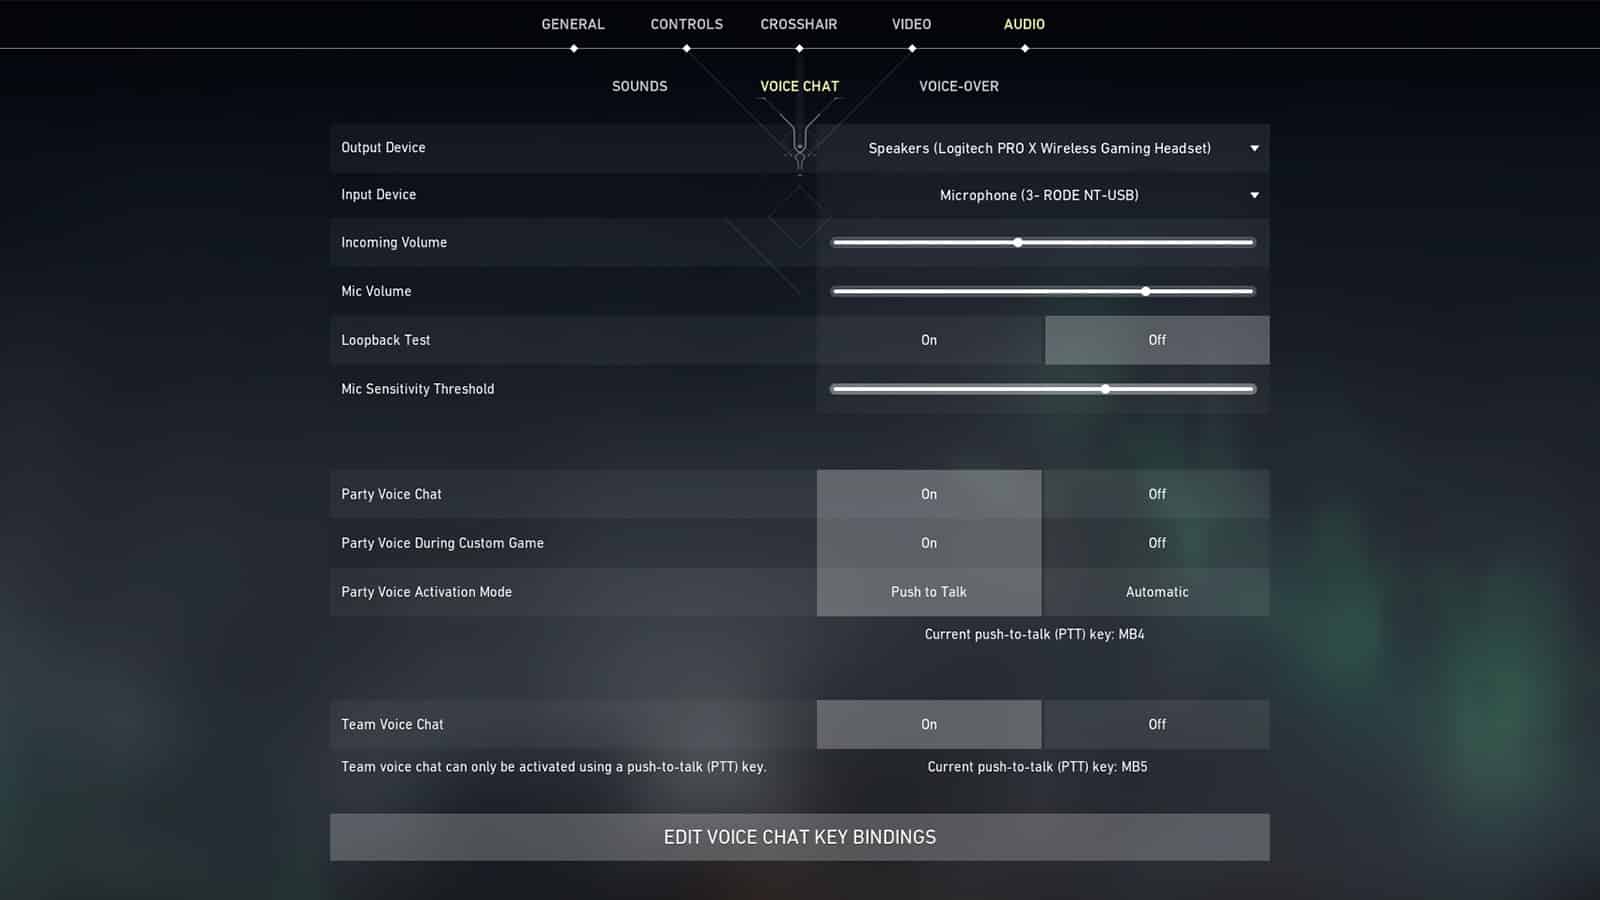 The voice chat audio settings screen in Valorant